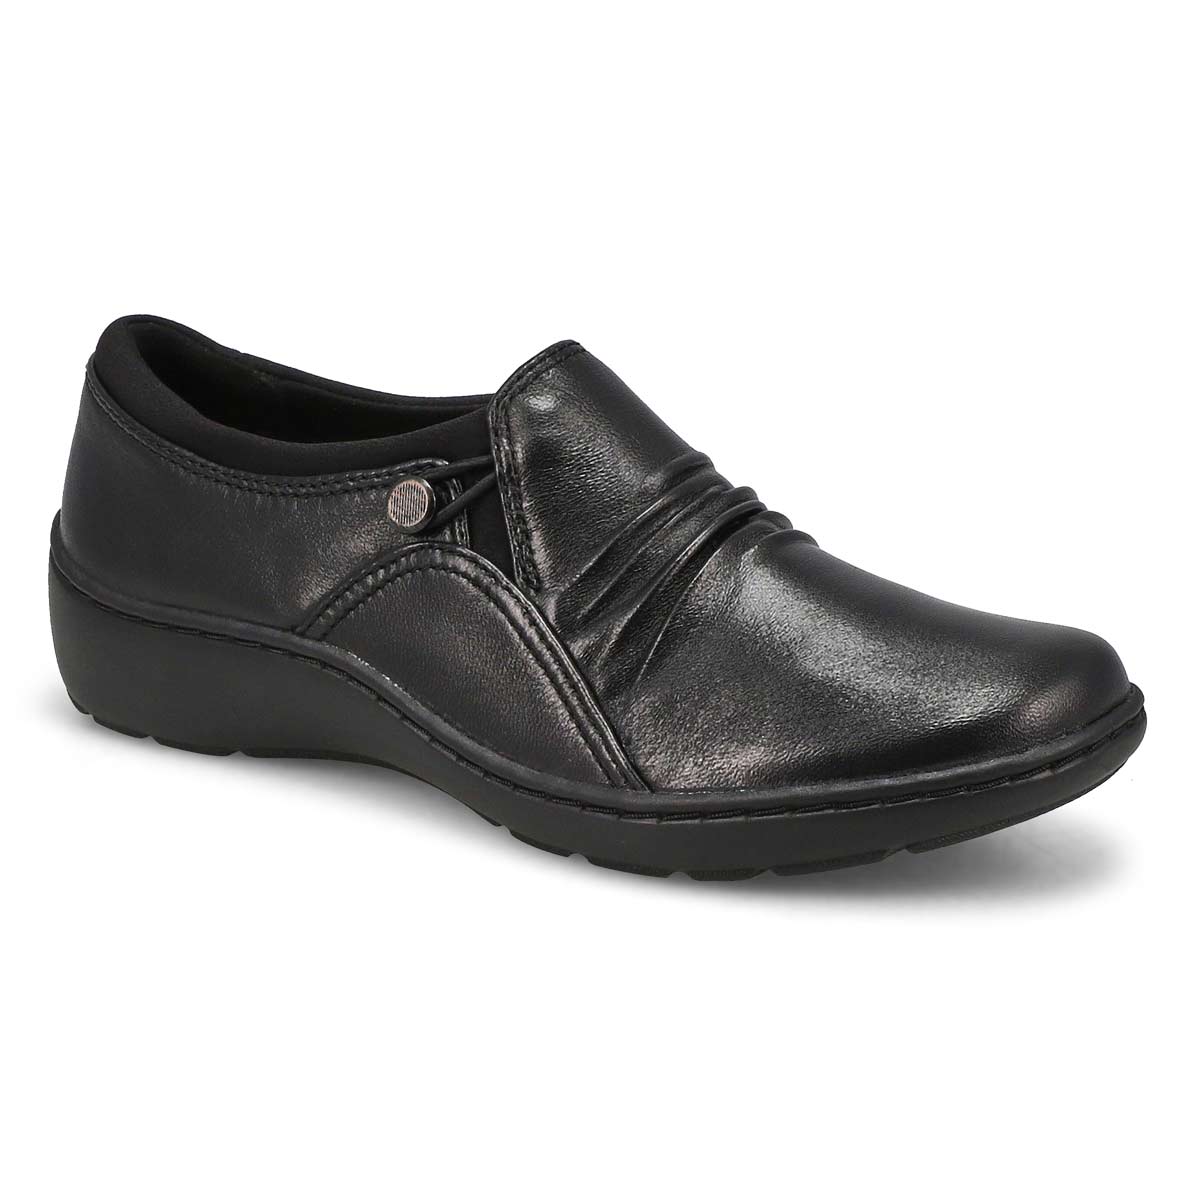 Clarks Women's Cora Dusk Casual Loafer - Blac | SoftMoc.com